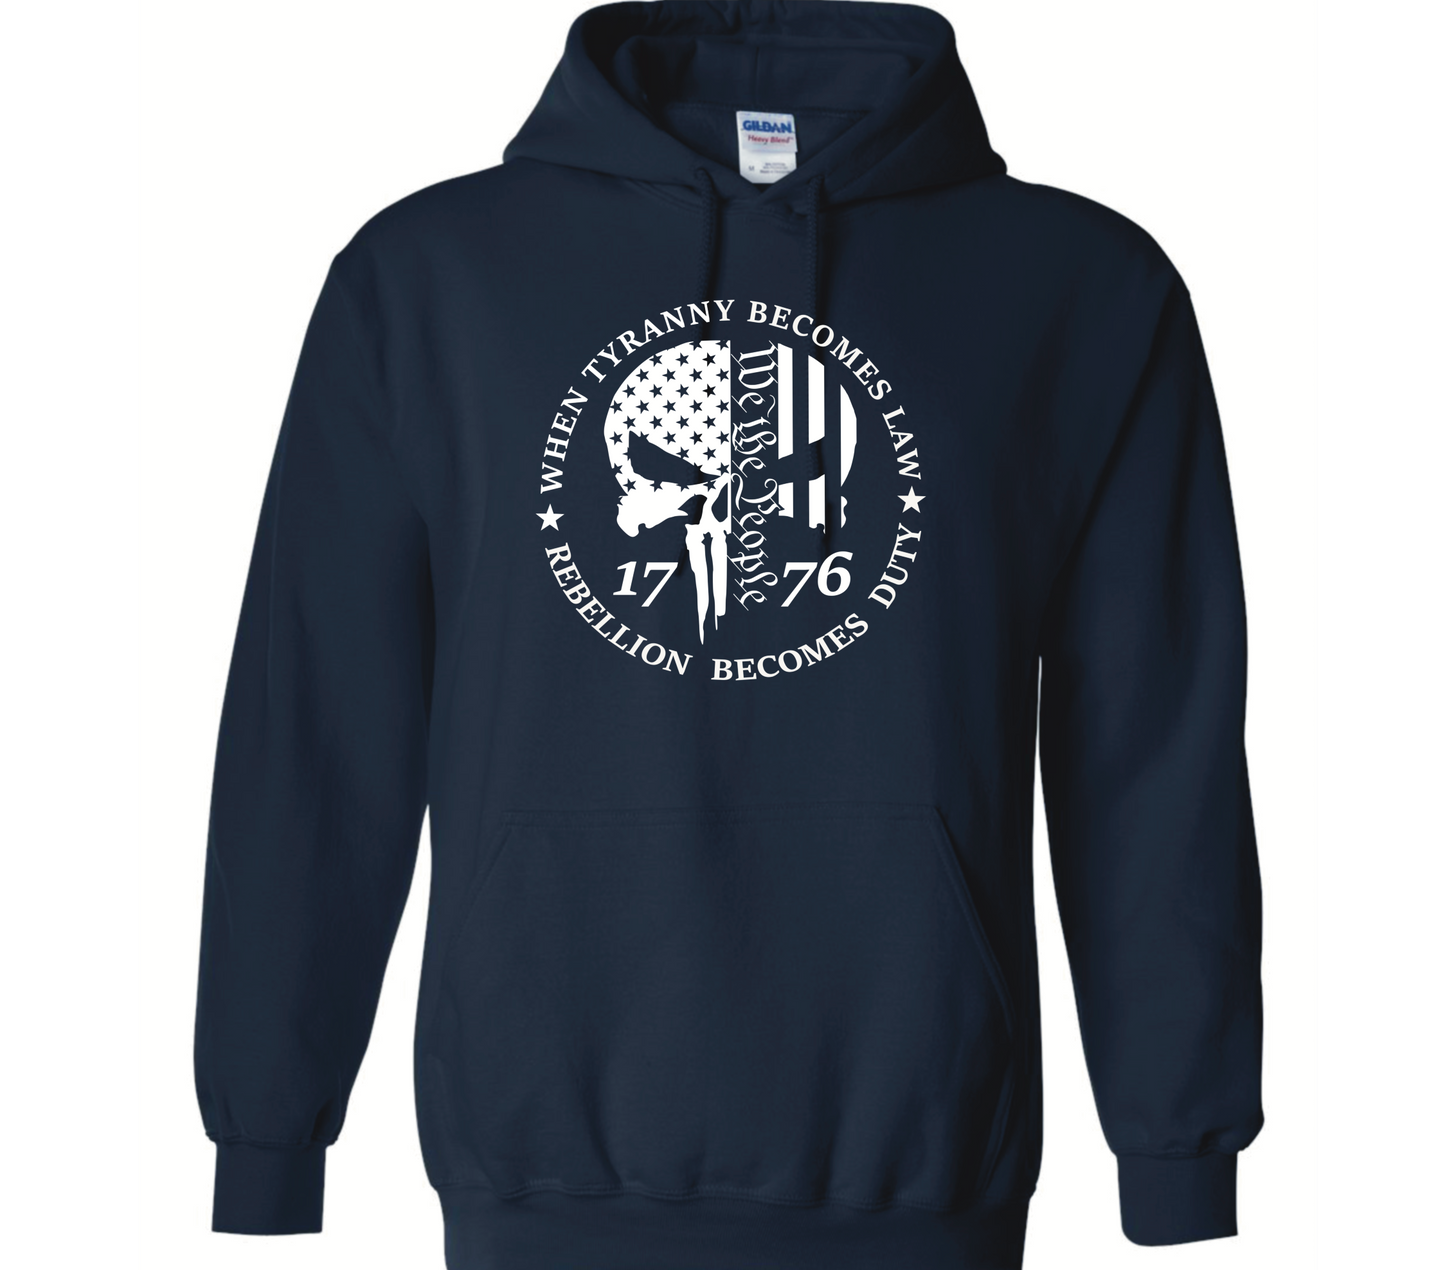 When Tyranny Becomes Law, Rebellion Becomes Duty Hoodie